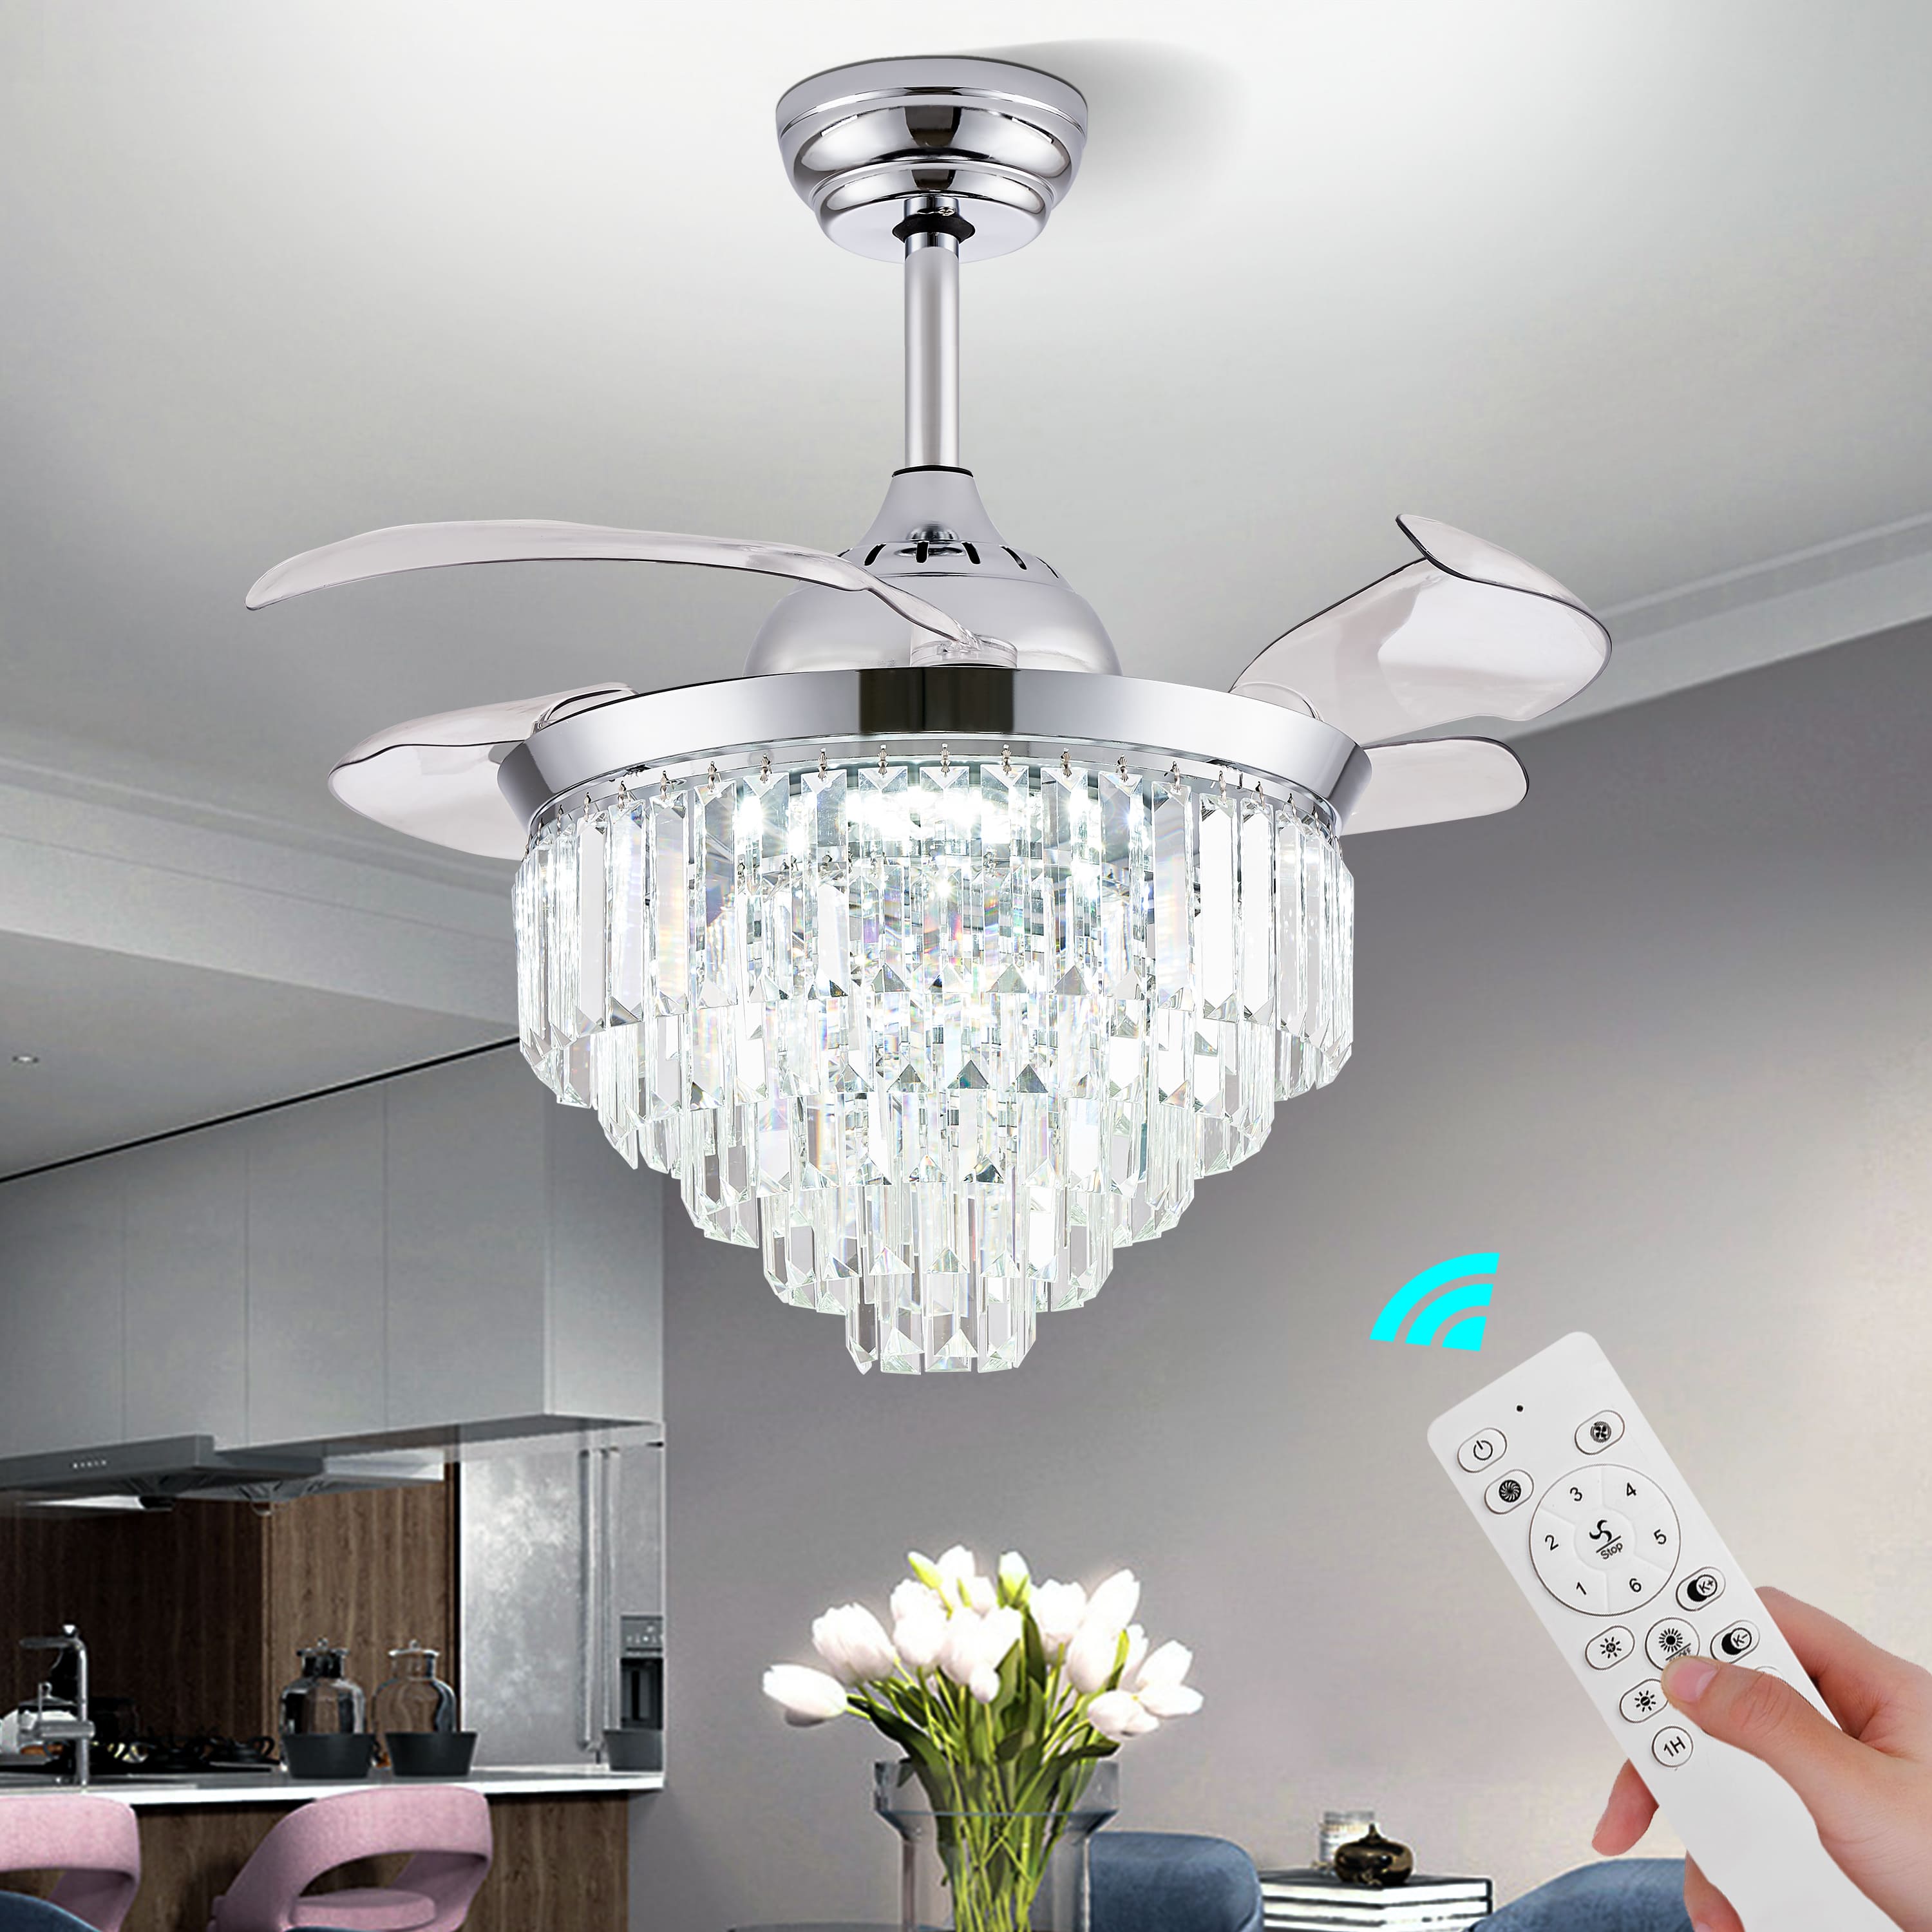 Finktonglan Dimmable Crystal Fandelier Ceiling Fan with Light and Remote, 36” Retractable Invisible Blades Fandeliers Modern Chandelier Ceiling Fan for Dining Room Bedroom Living Room, Chrome